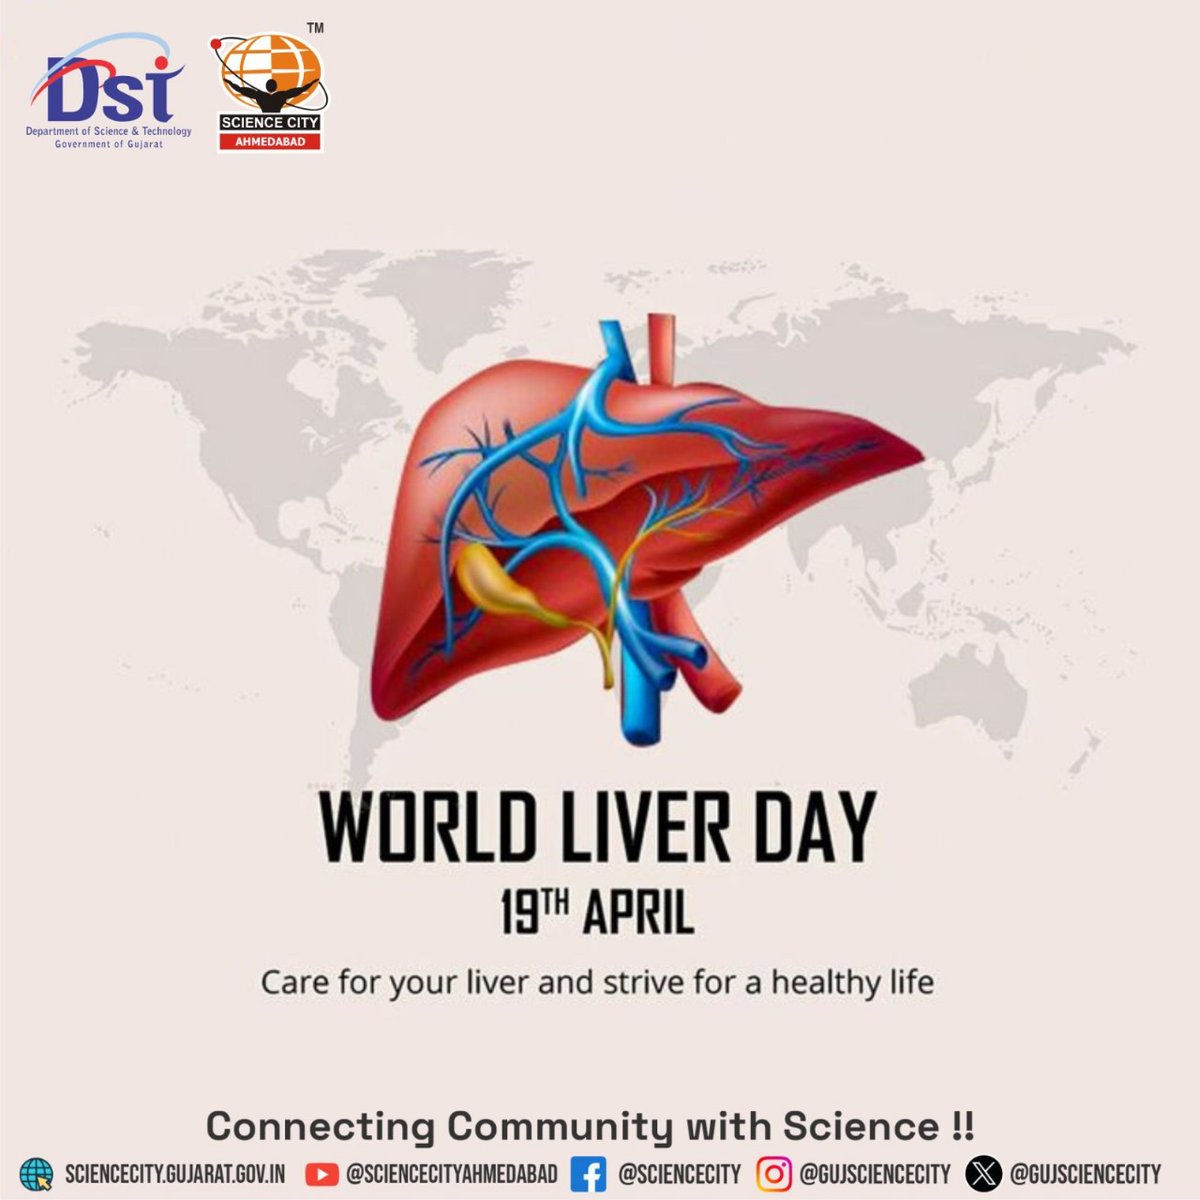 It's #WorldLiverDay!  Hepatitis, fatty liver, and other conditions threaten this vital organ. Share this to raise awareness and promote liver health! #HealthyLiverHealthyLife #ChaloScienceCity @indiadst @dstgujarat @jbvadar @InfoGujarat